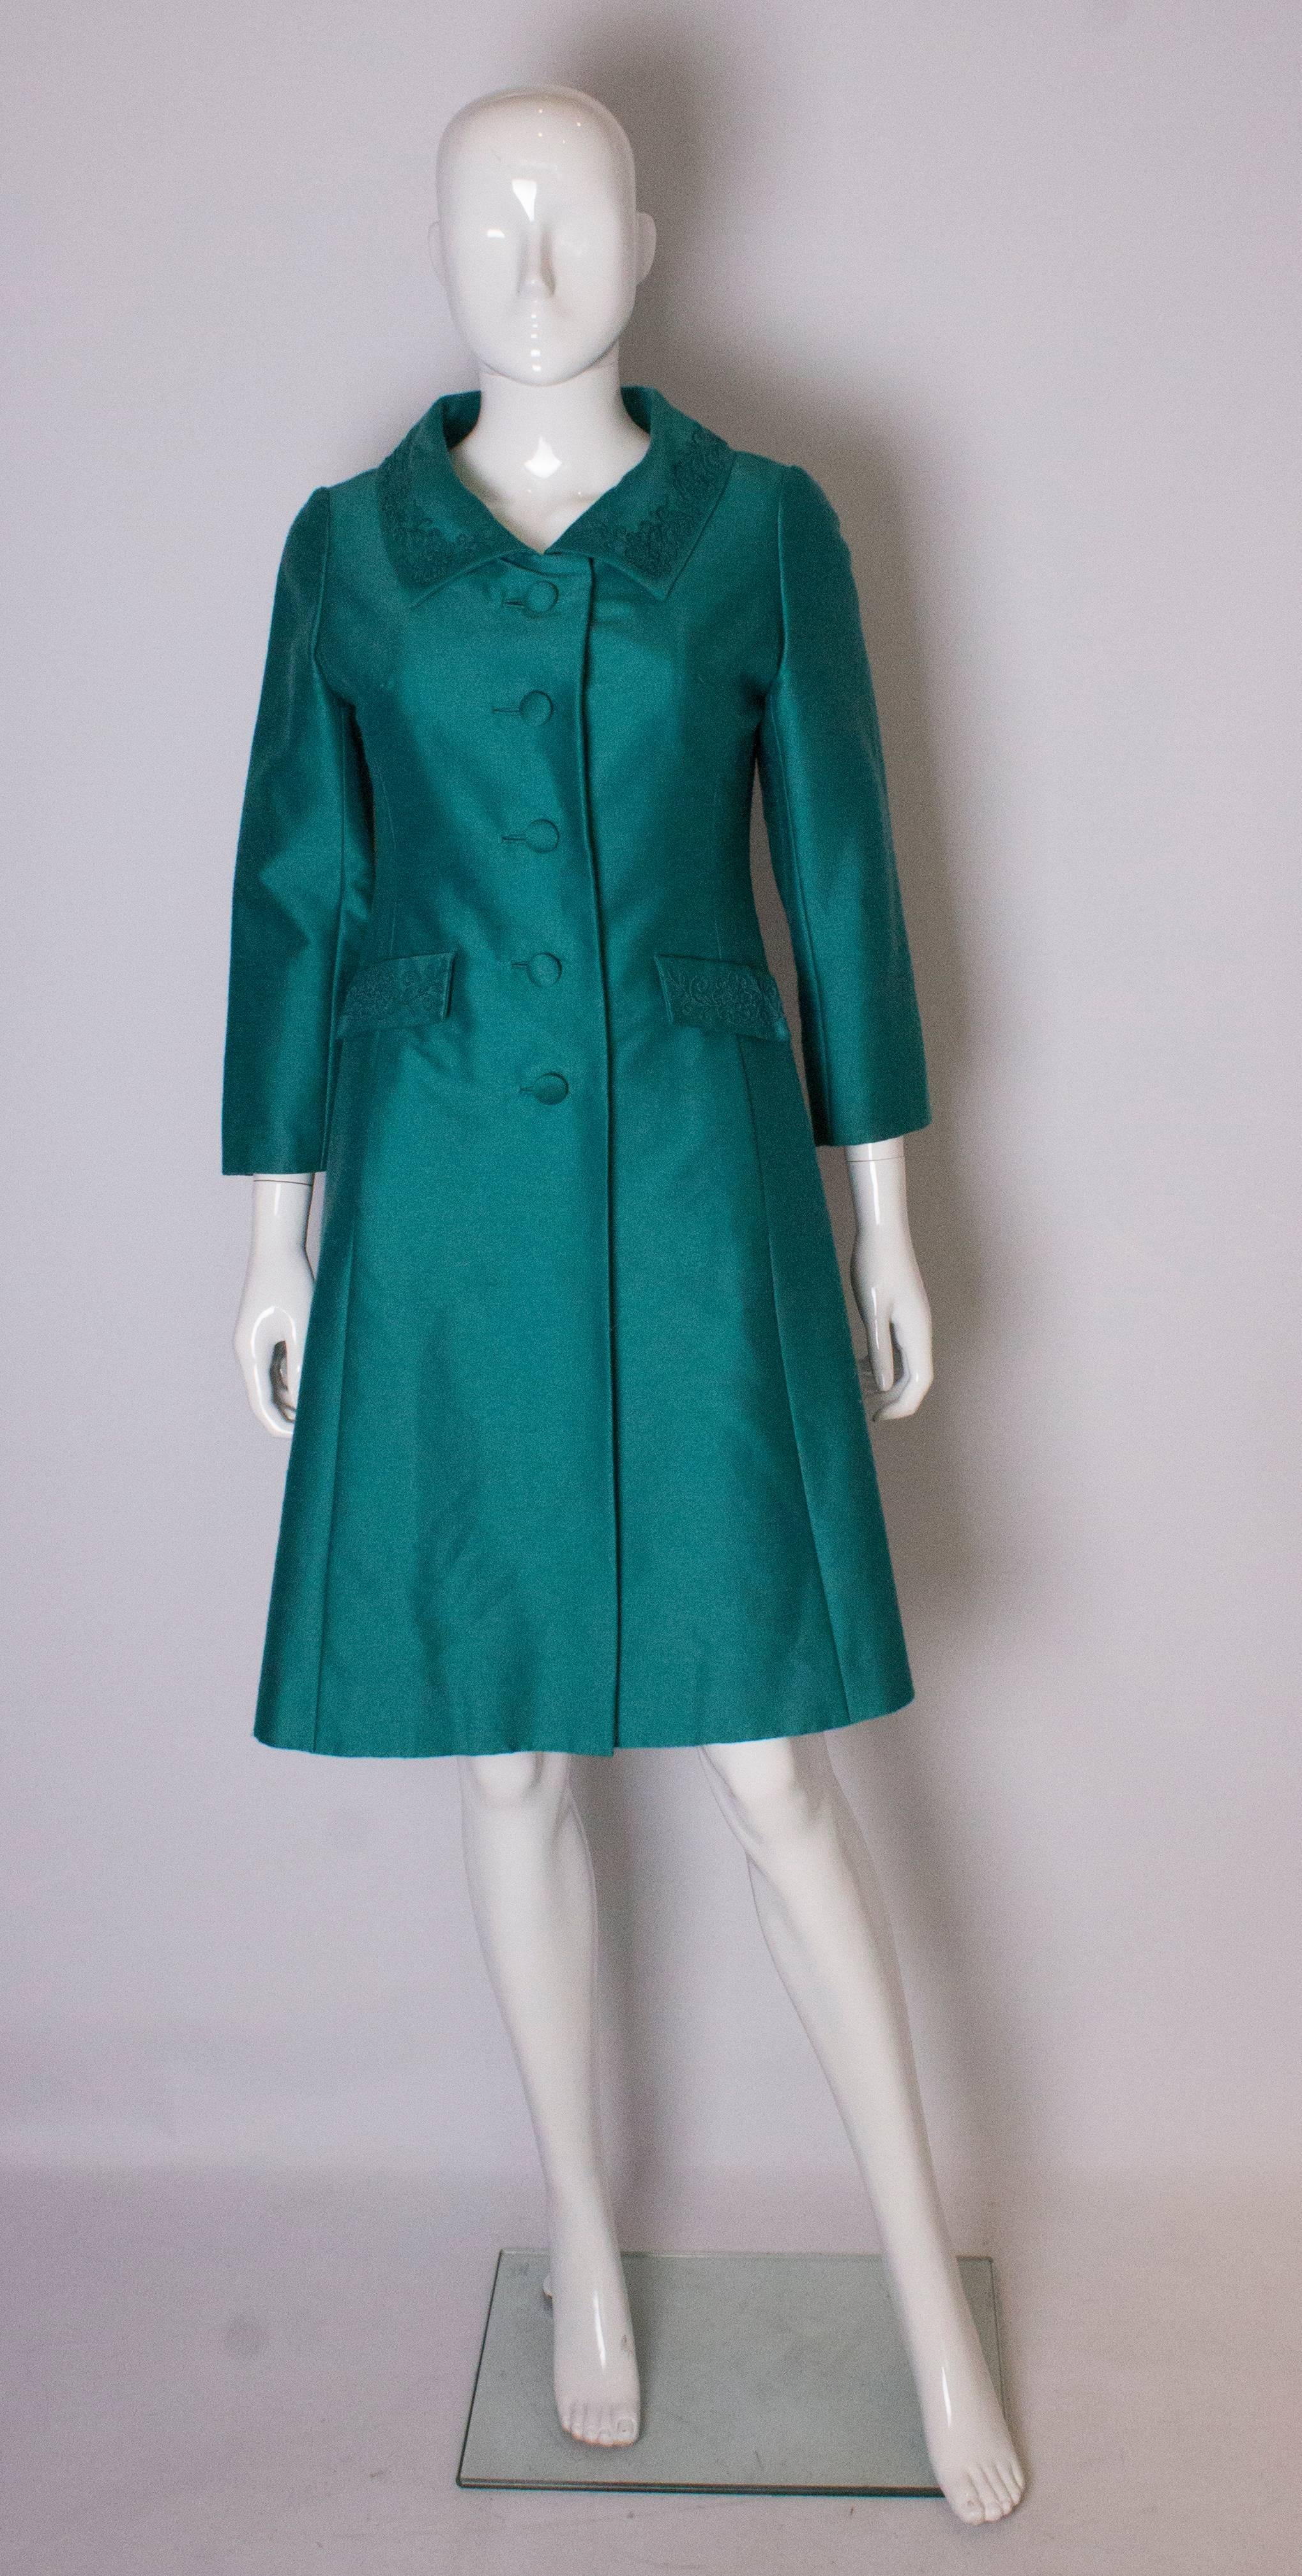 A chic vintage coat for any season. The coat is a wonderful teal colour, in a wool mix with satin lining with detail on the collar and pockets. It is fully lined.